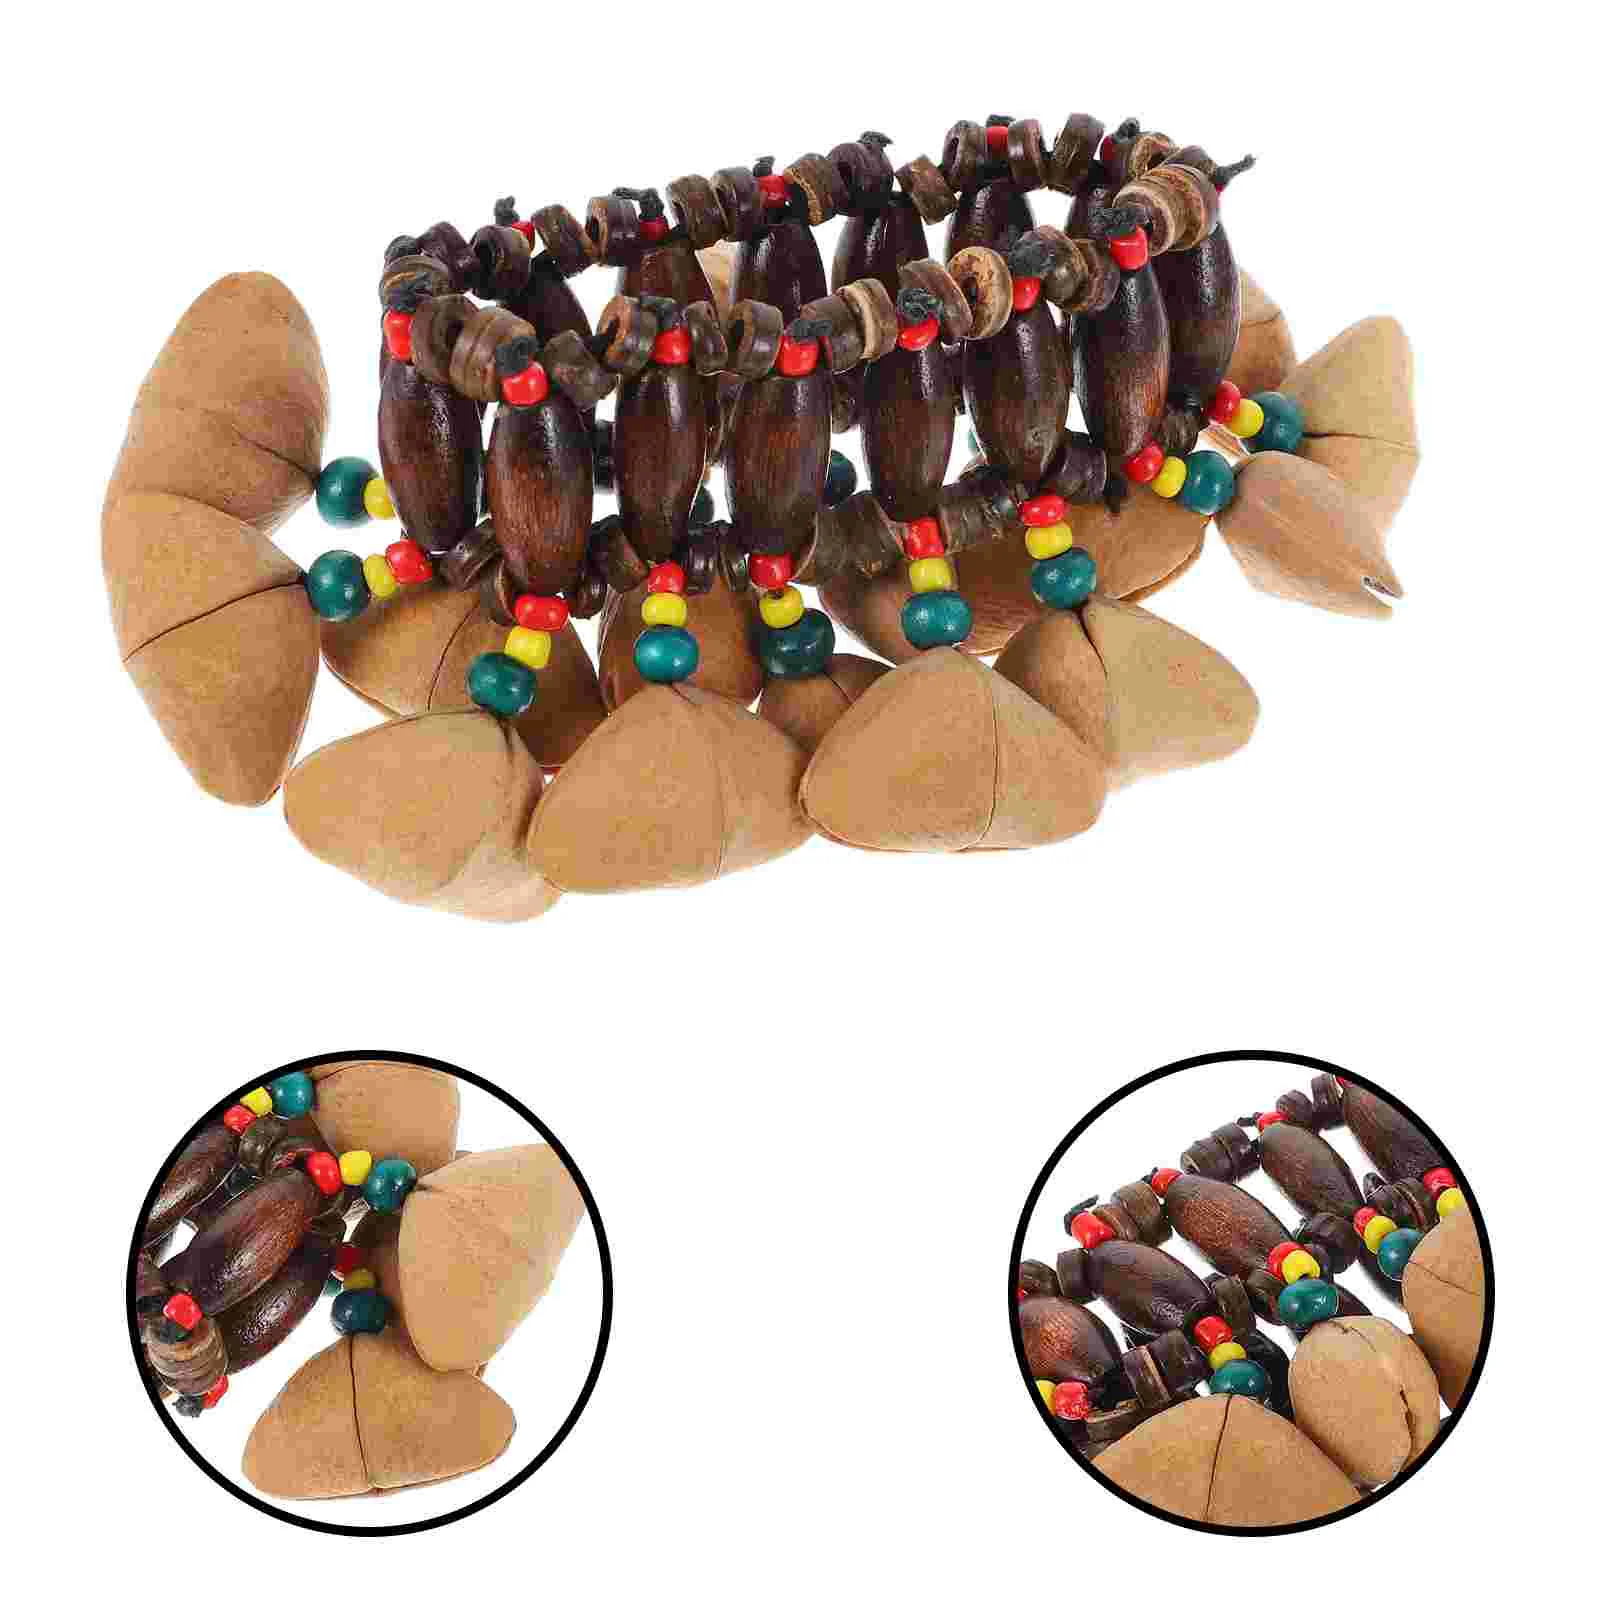 

African Bracelet Tribal Bracelet Wooden Percussion Handbell Hand Bell Instrument Toy Conga Percussion Hand Chain